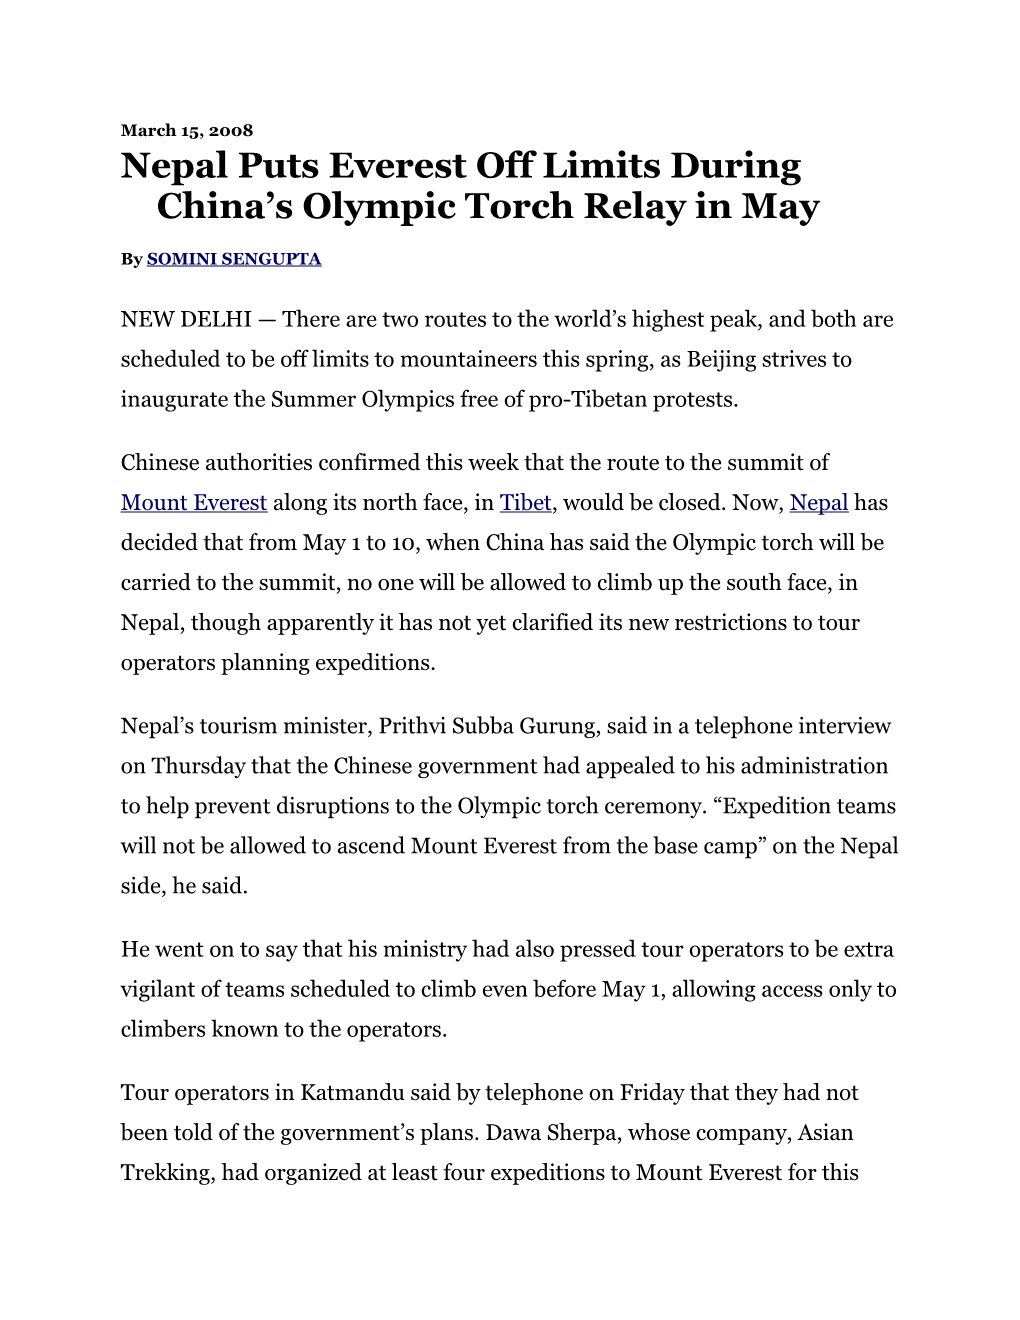 Nepal Puts Everest Off Limits During China S Olympic Torch Relay in May